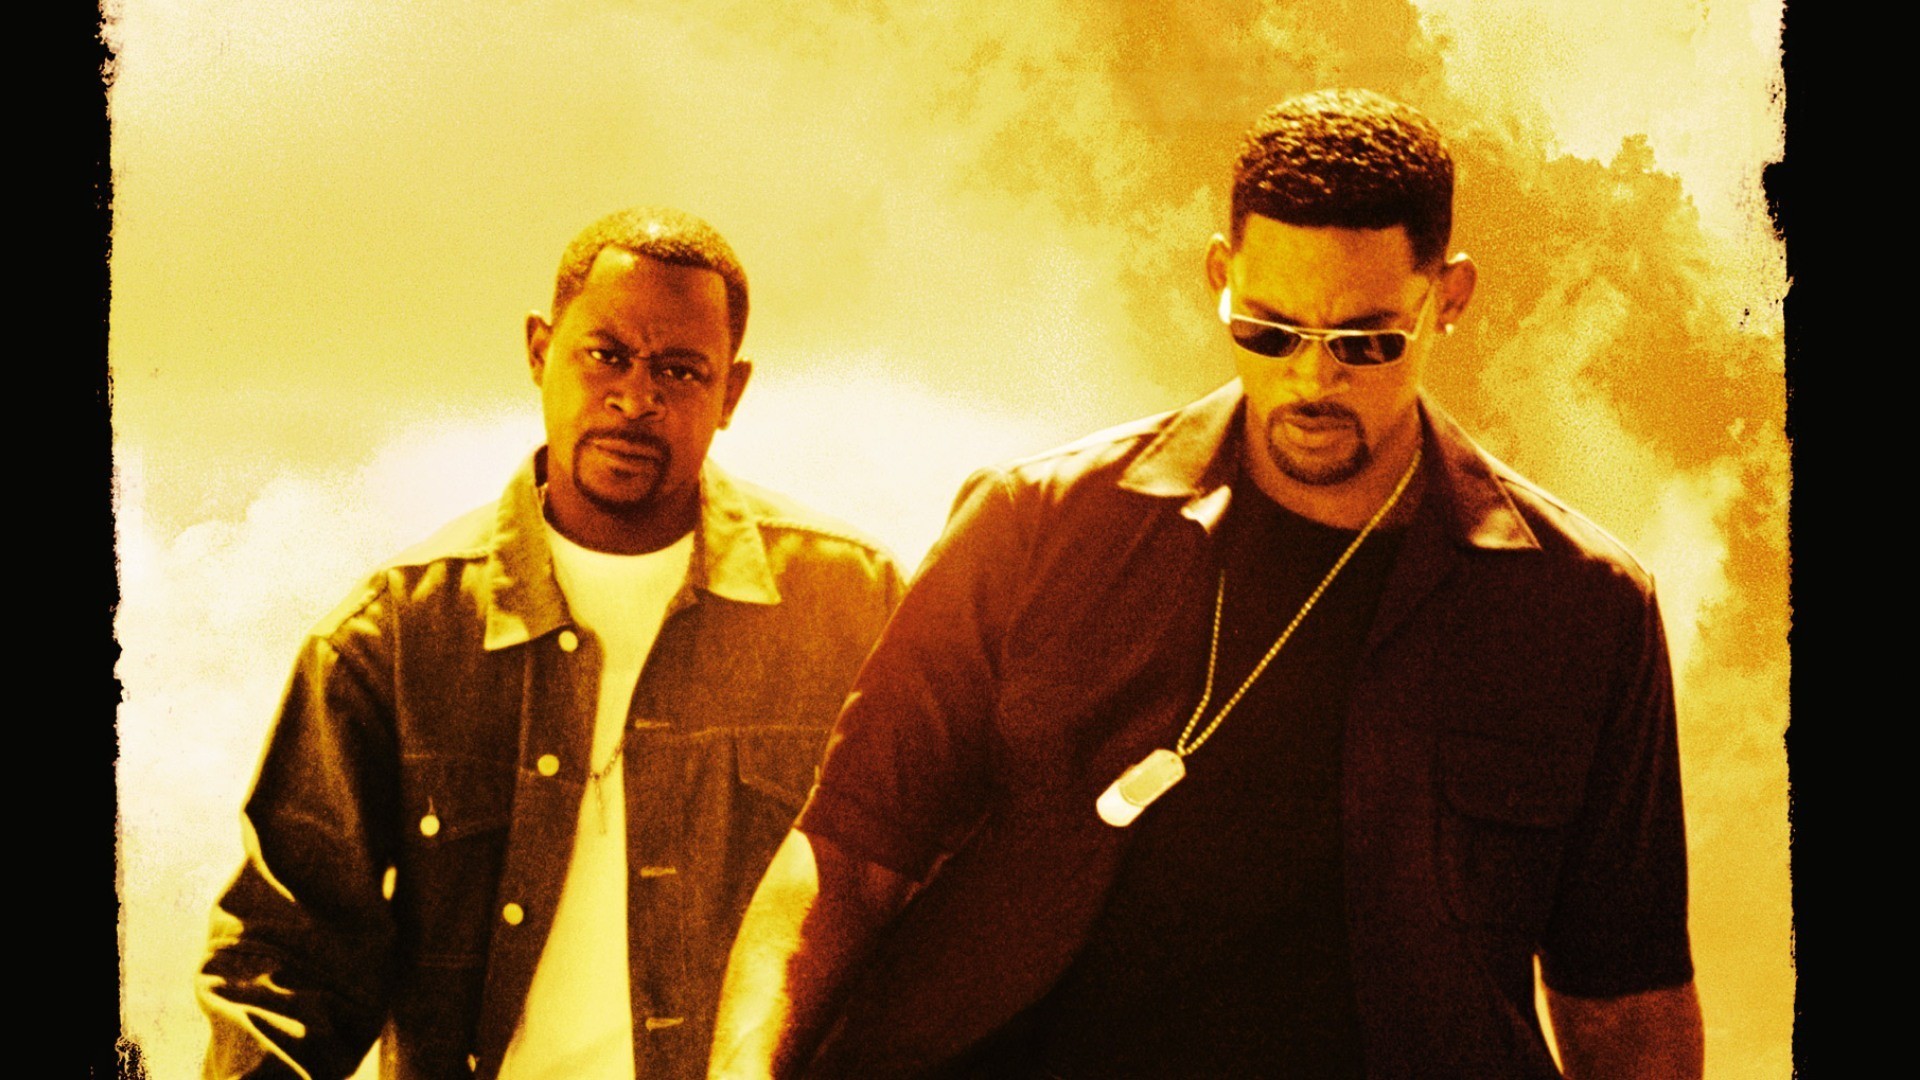 1920x1080 Bad Boys 1 & 2 images photos HD wallpaper and background photos